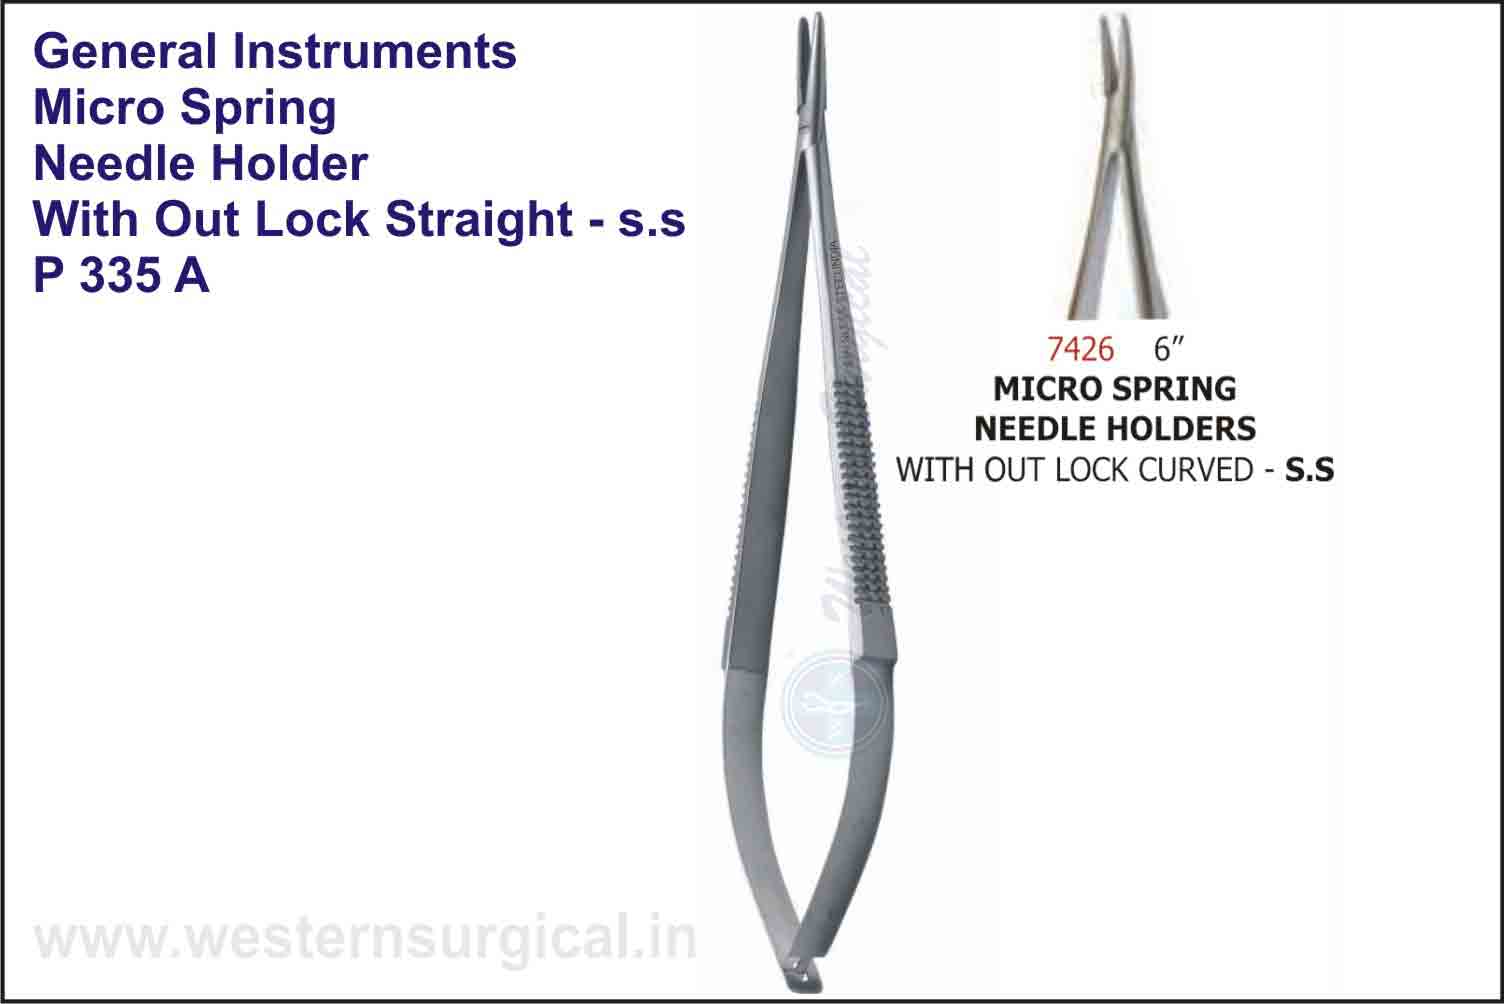 MICRO SPRING NEEDLE HOLDER WITH OUT LOCK STRAIGHT & CURVED - S.S